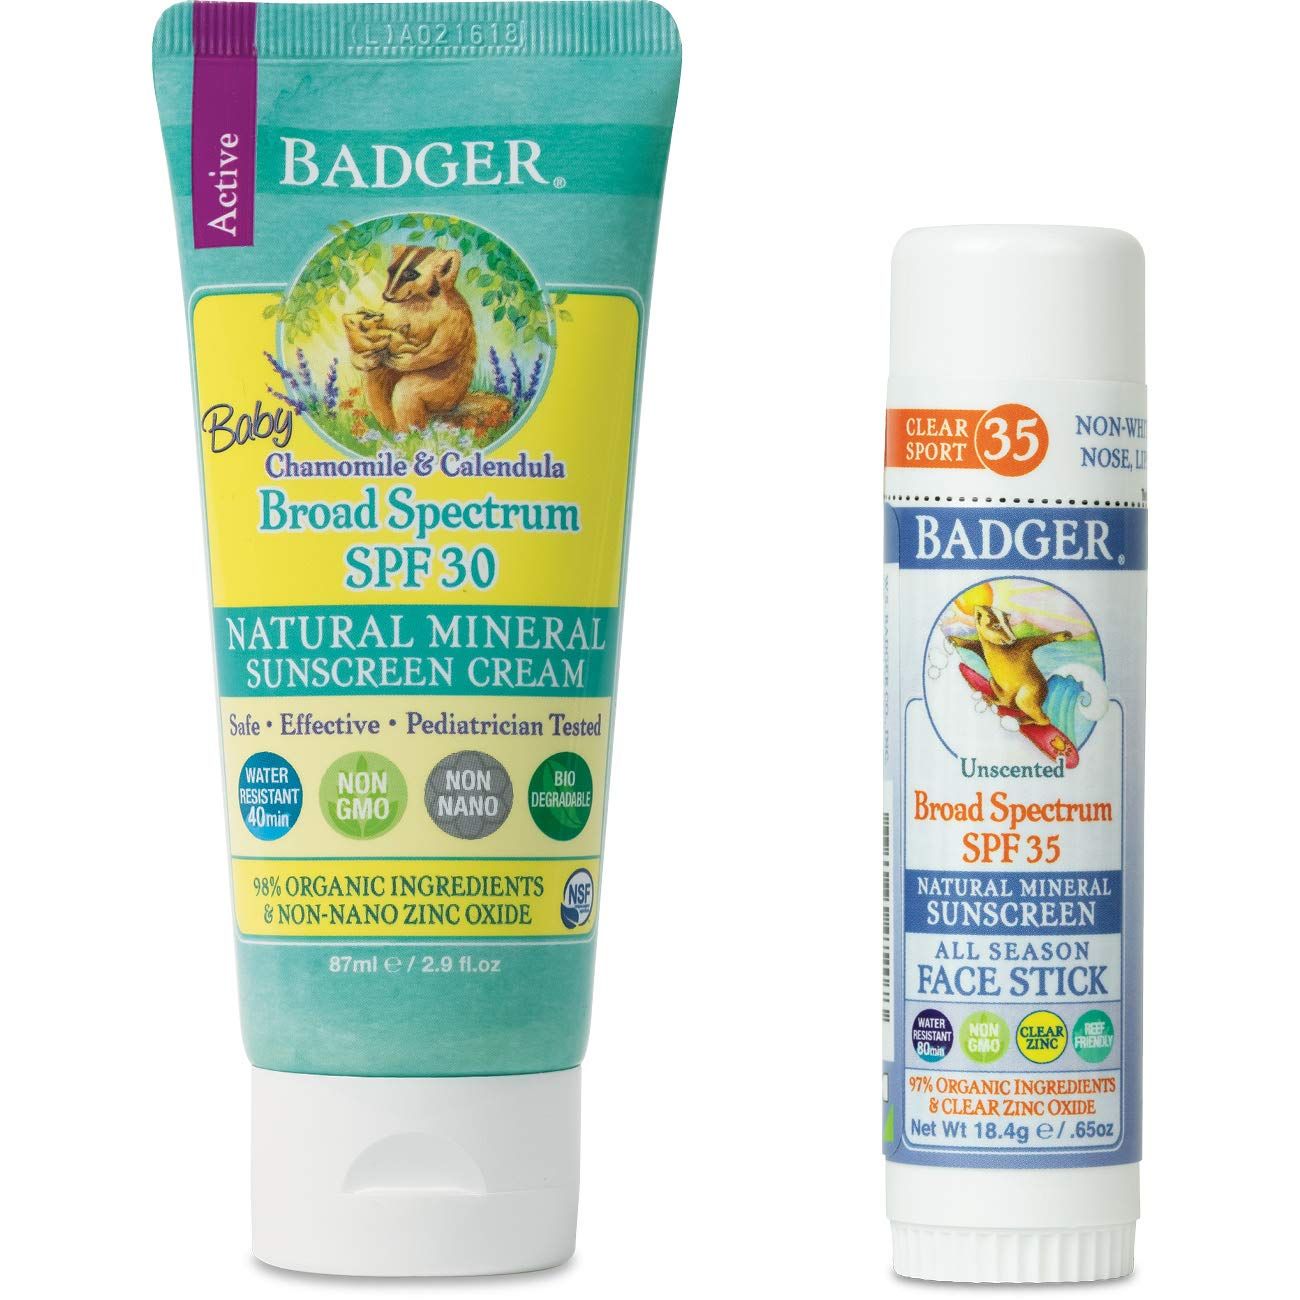 best baby sunscreen no chemicals